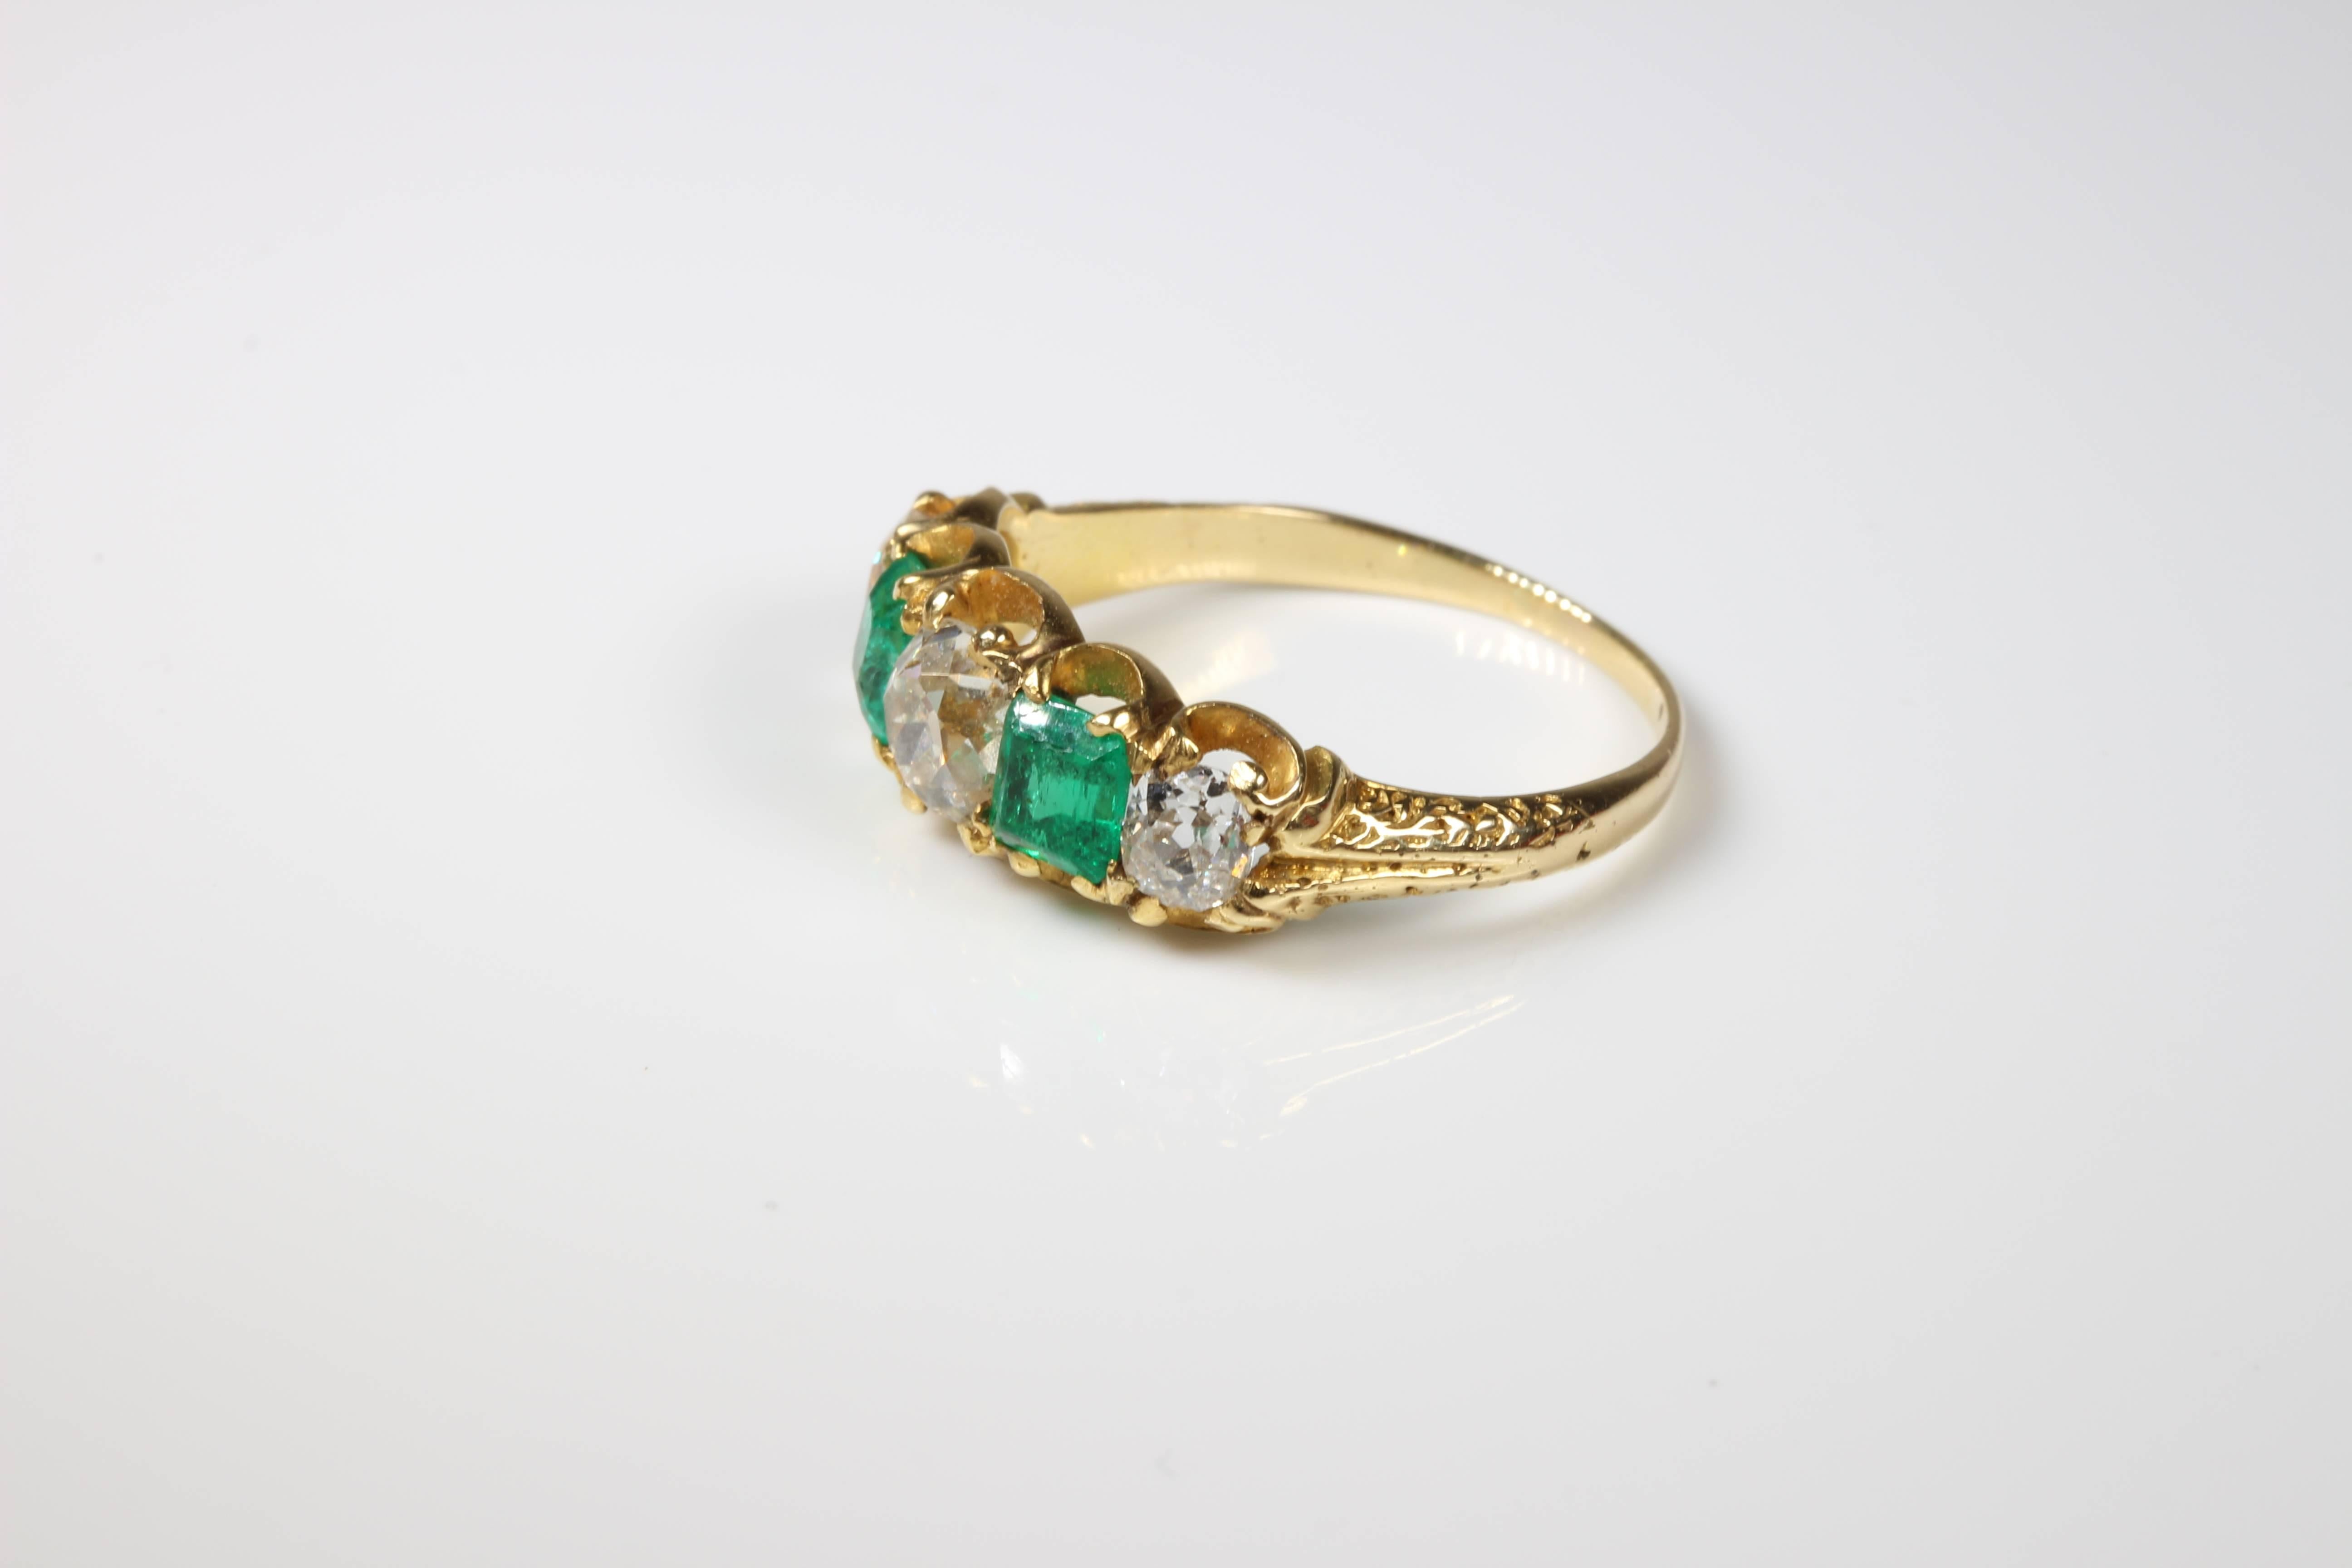 Victorian 18ct gold half hoop emerald and diamond eternity ring. So rare to find this design with emeralds. We love the superb colour of these emeralds too! Set with 2 old emerald cut natural emeralds and 3 old cushion cut diamonds of clarity VS,